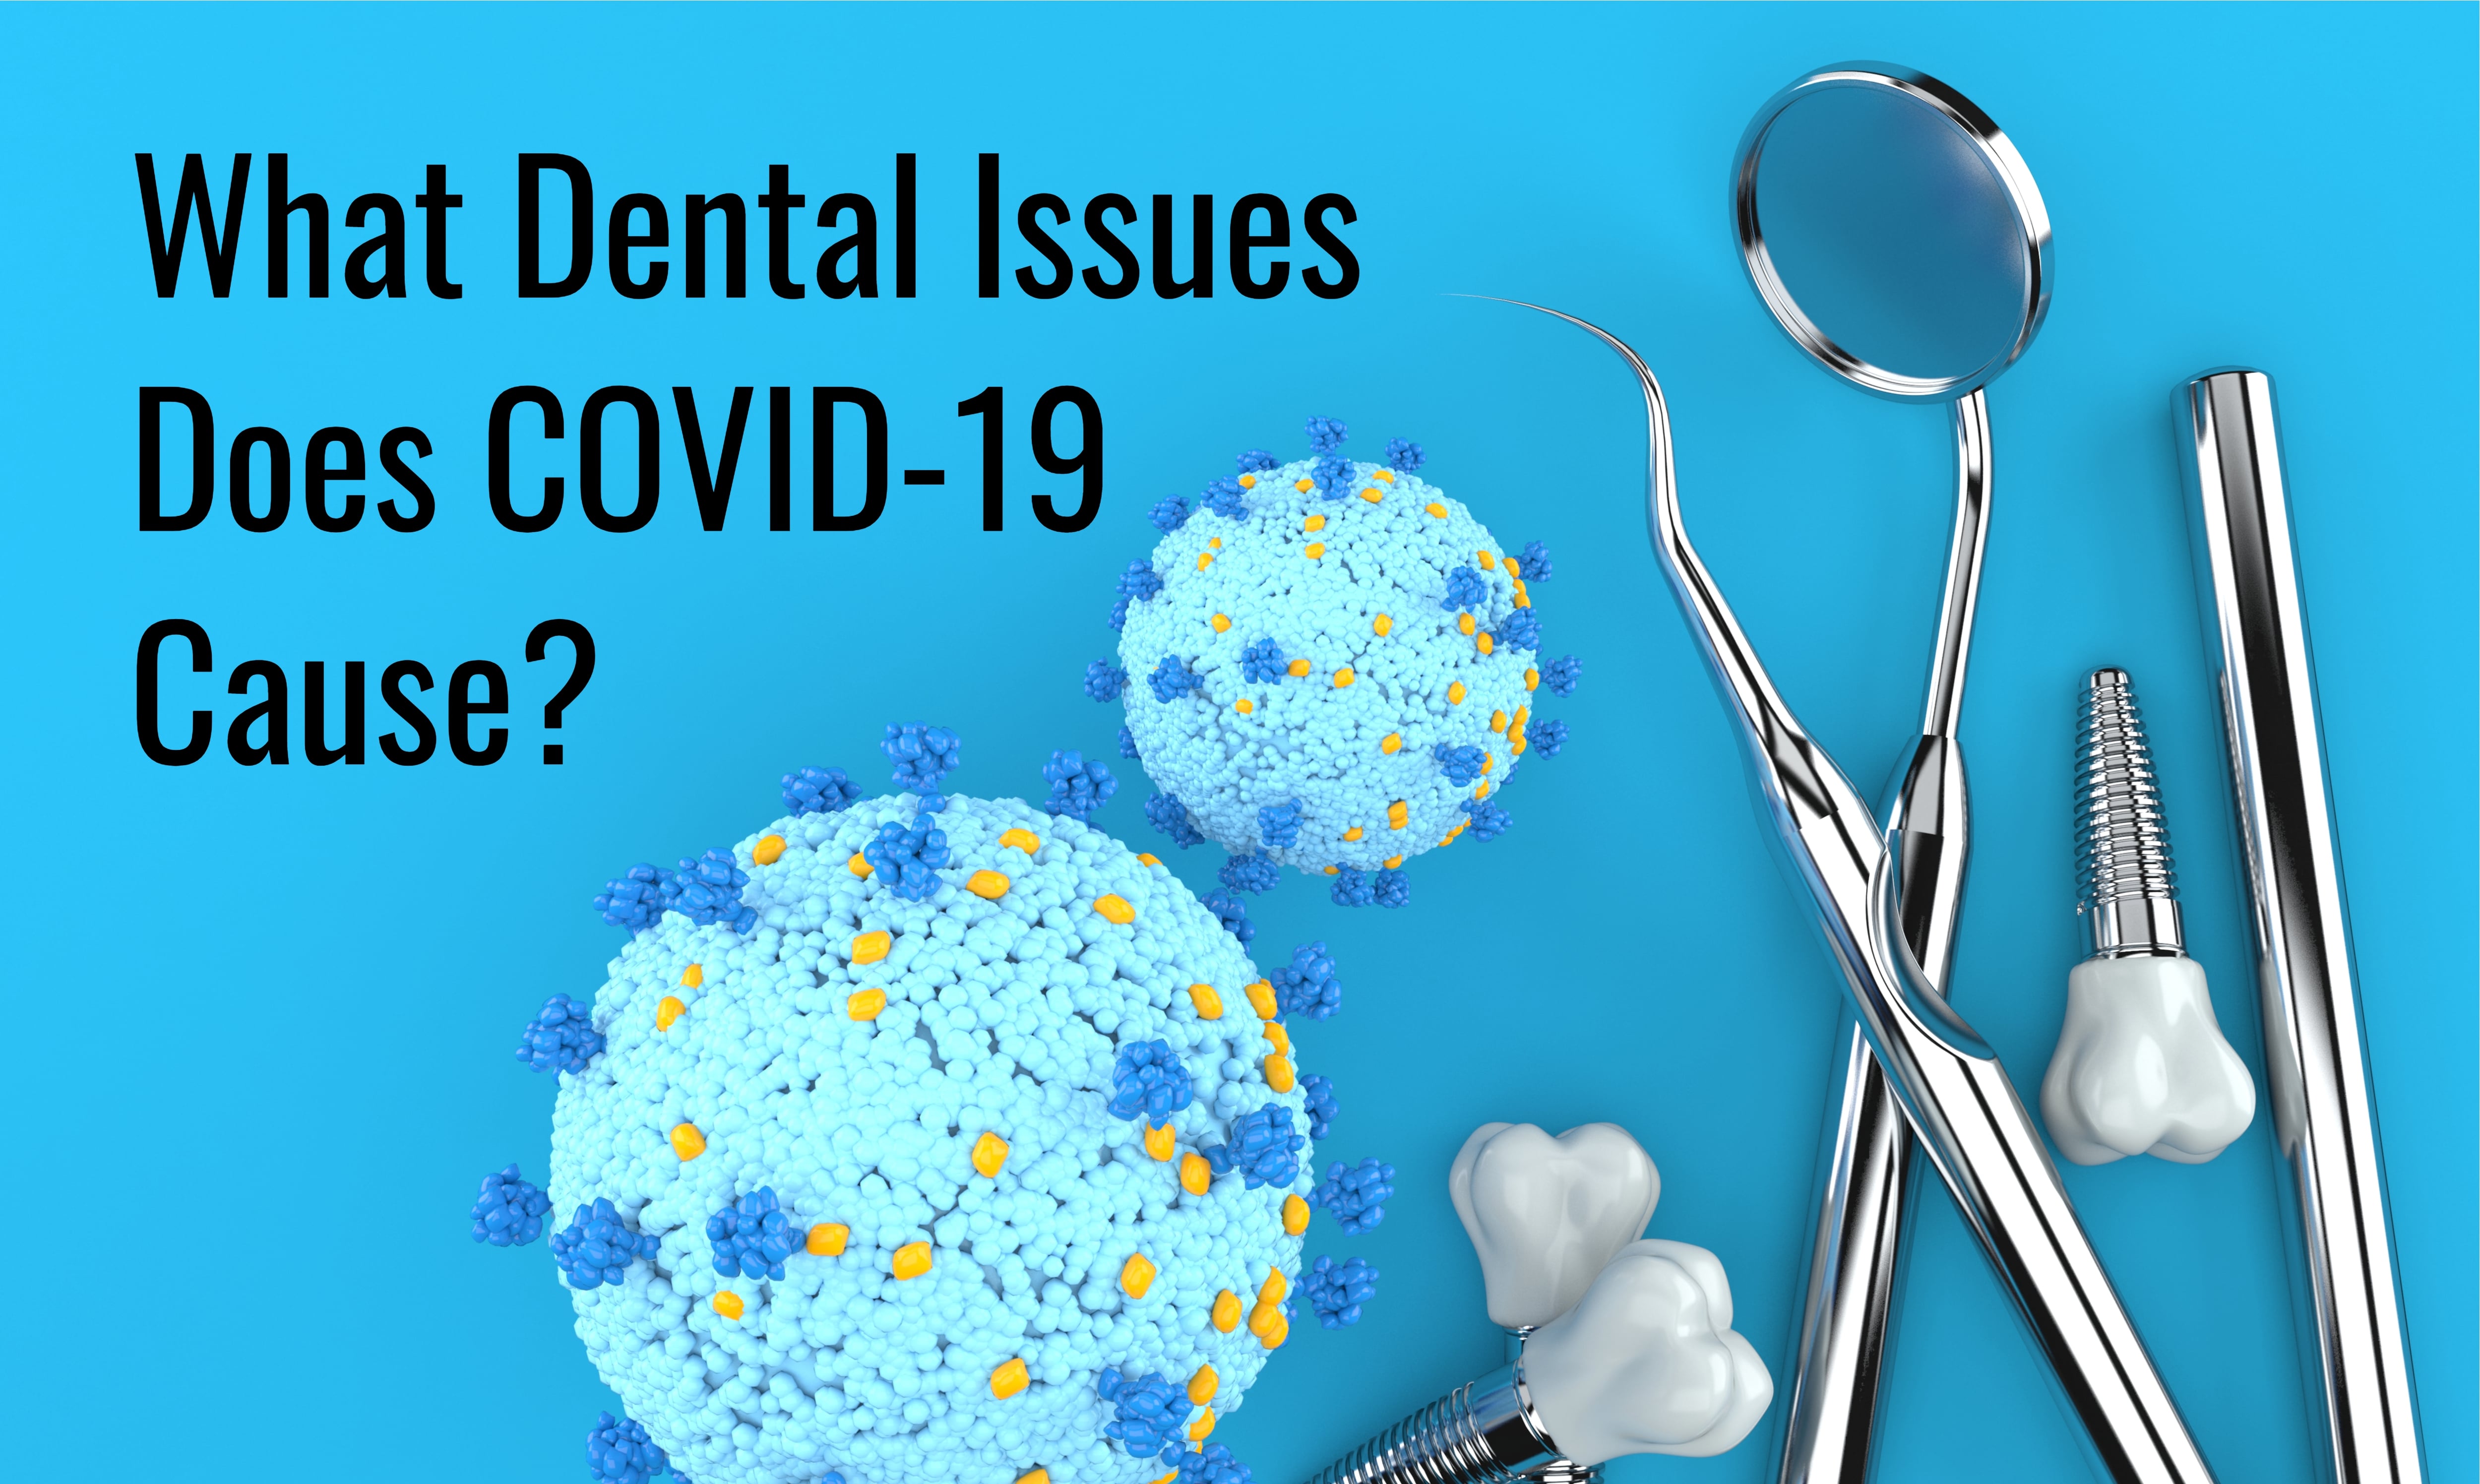 What Dental Issues Does COVID-19 Cause?